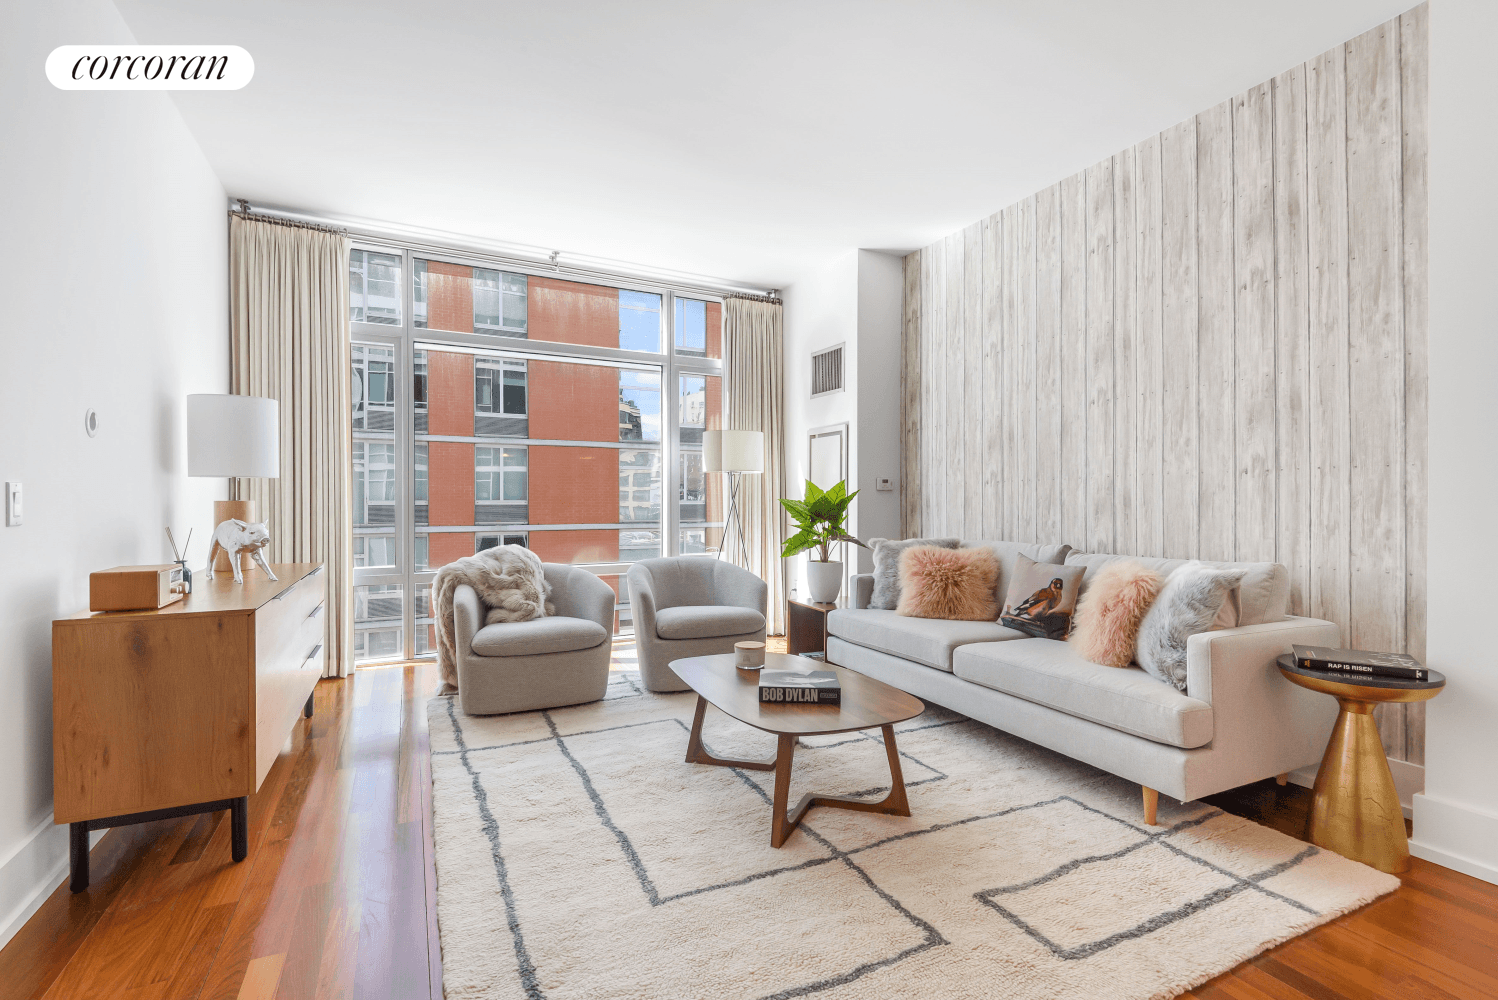 One bedroom homes are rarely offered at The Slate condominium and this one is exceptional.